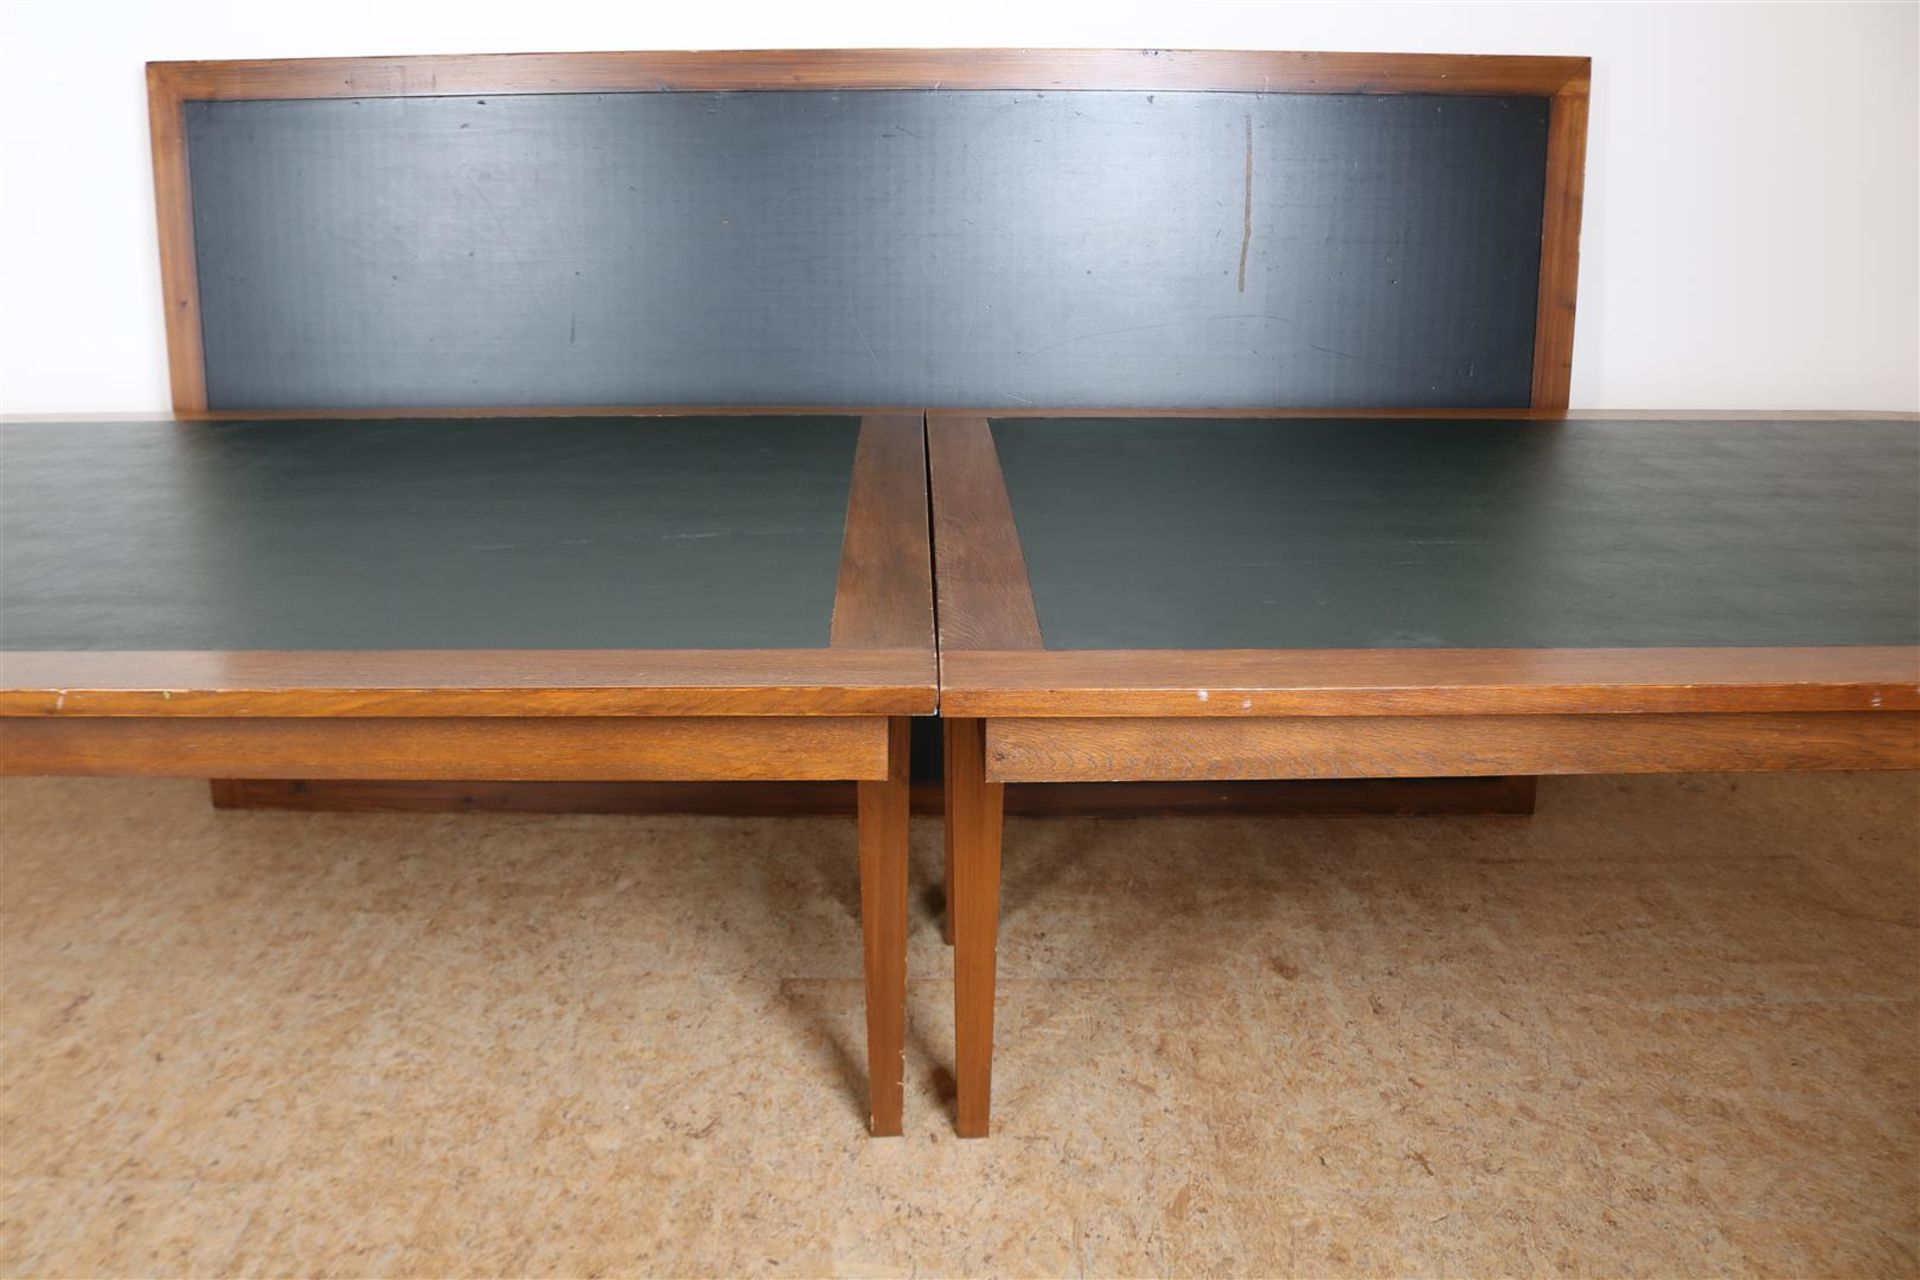 Oak conference table with black leather inlaid top on tapered legs, 78 x 440 x 136 cm. here is a - Image 3 of 5